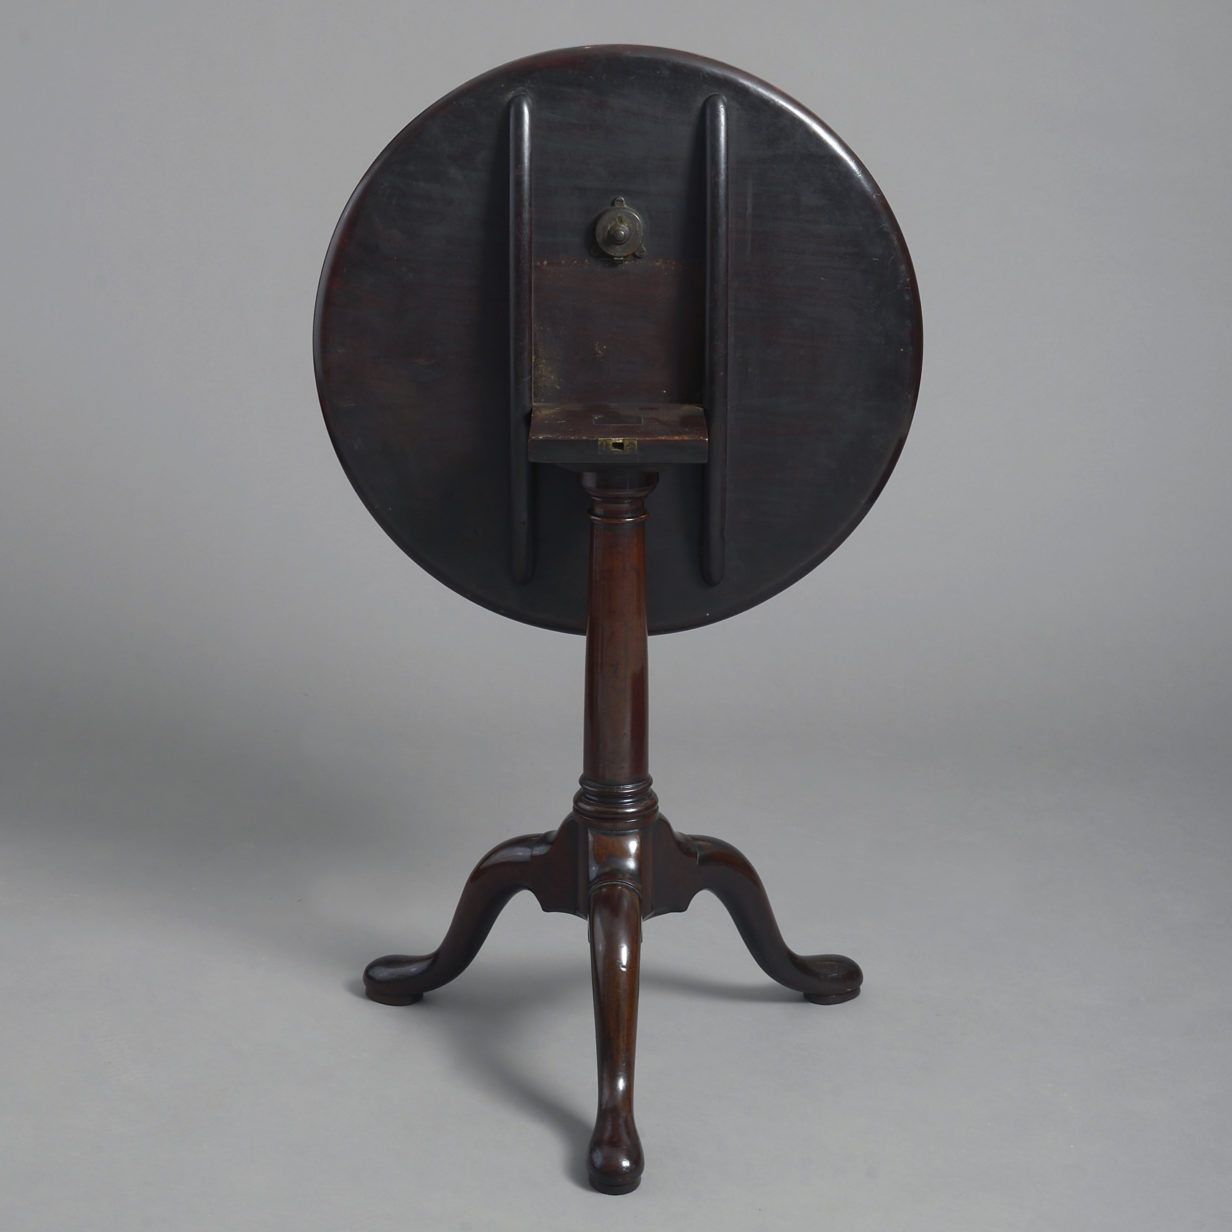 An 18th Century George Ii Period Mahogany Tripod Table Intended For Console Tables With Tripod Legs (Photo 11 of 20)